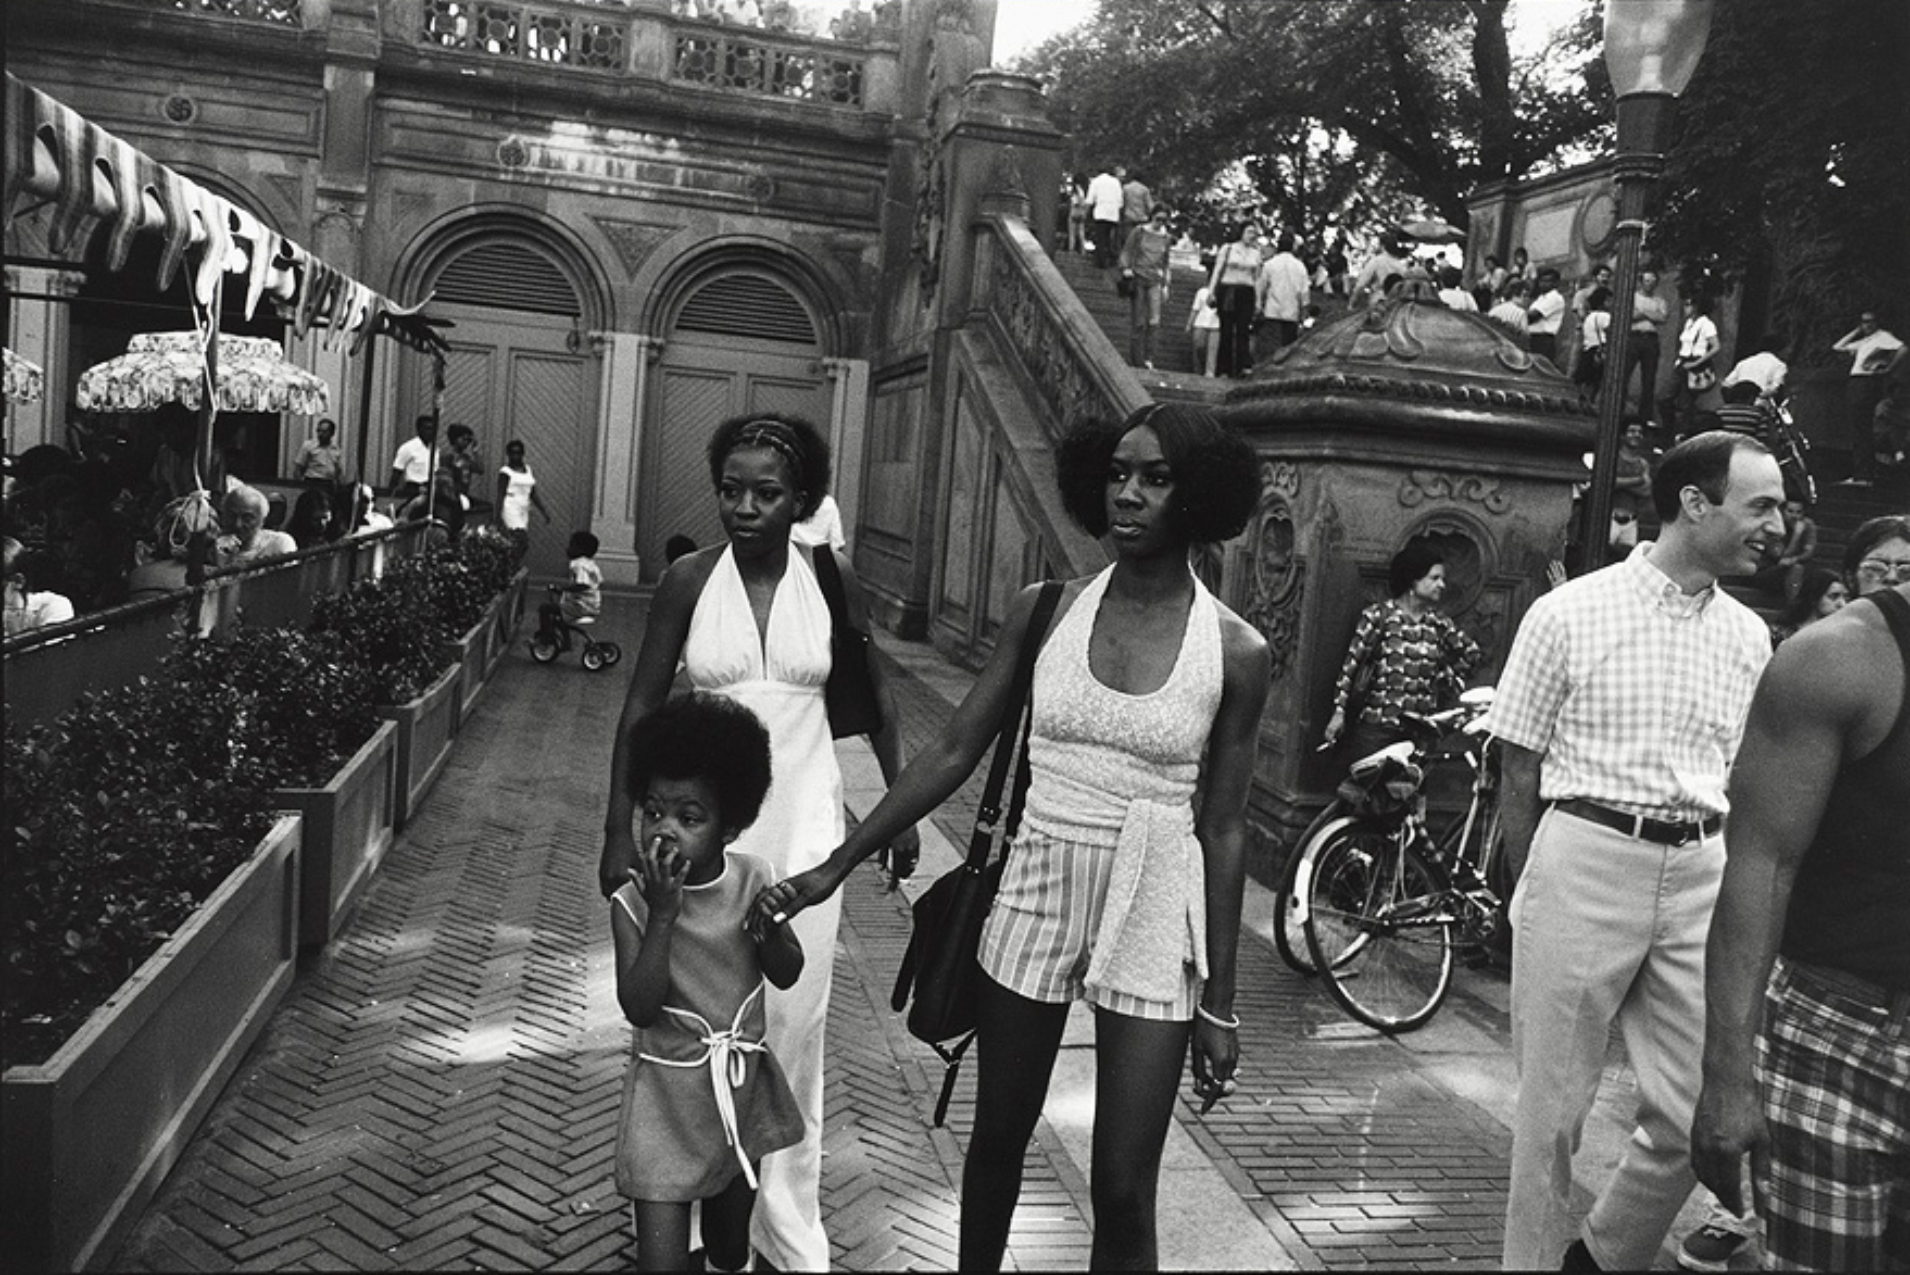 Two black women, one holding child's hand, walking away from stone stairway, restaurant on left and people on right.